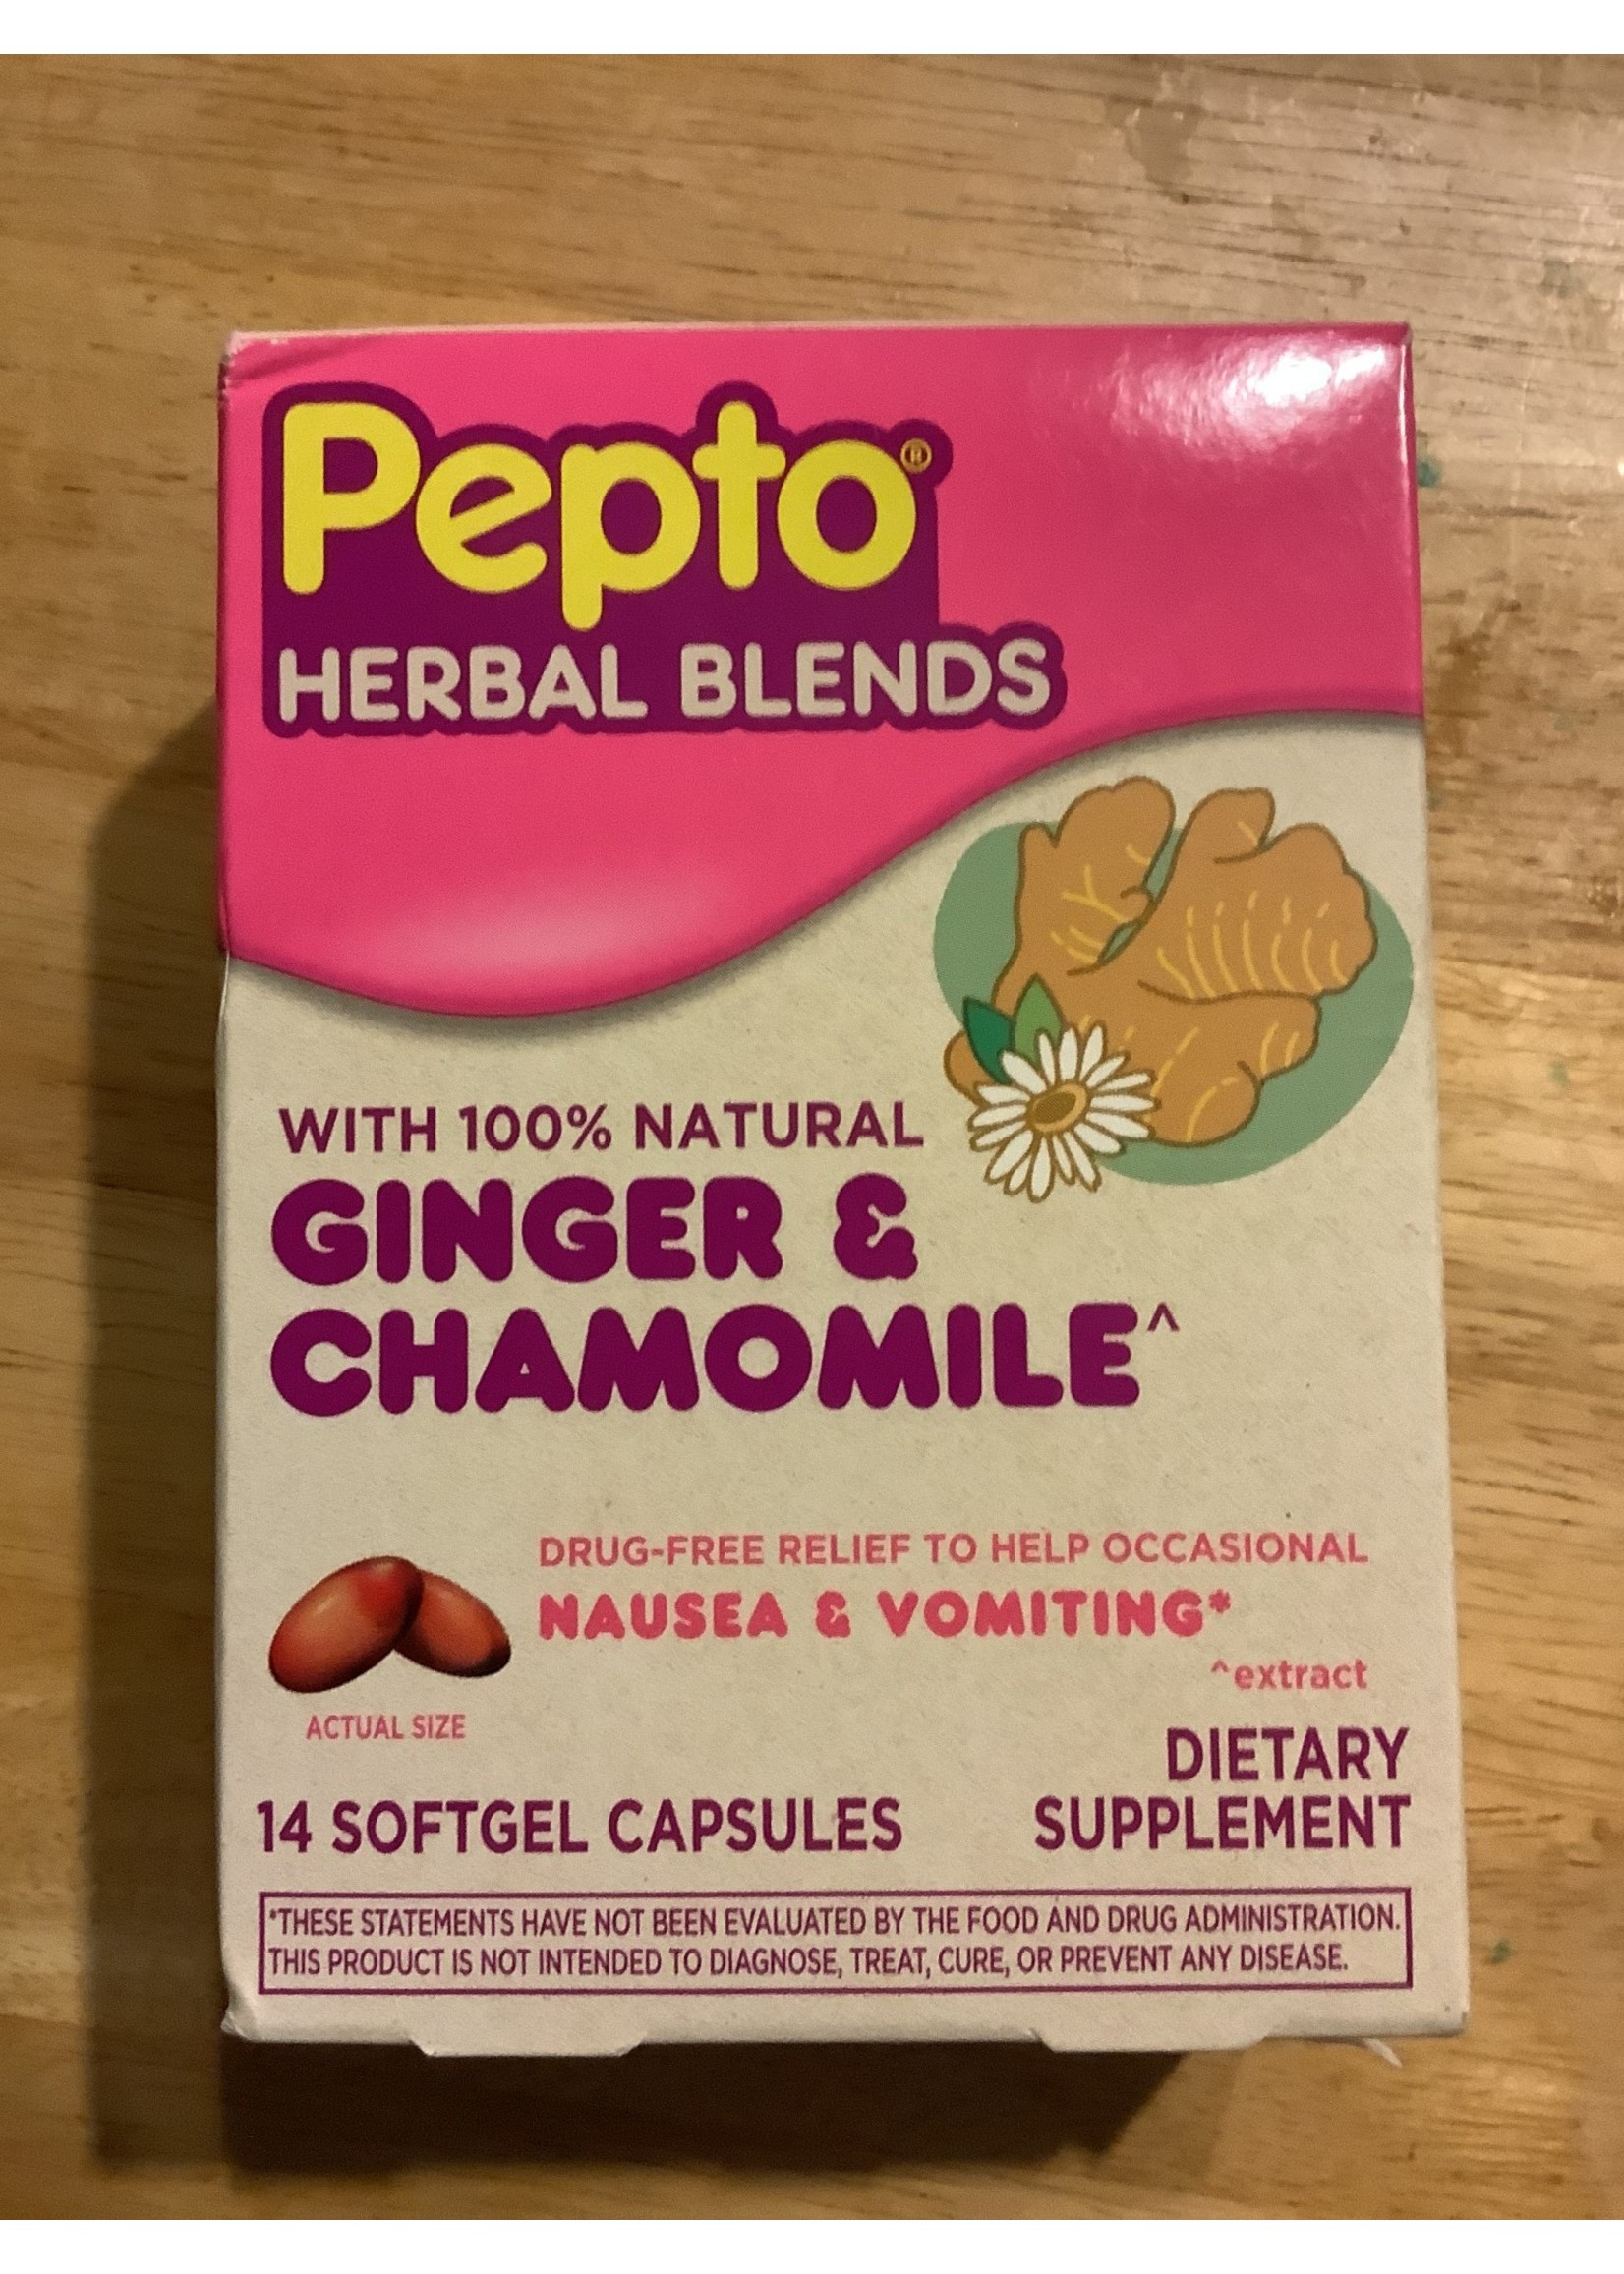 Pepto-Bismol Herbal Blends Softgel Capsules for Morning Sickness - Natural Ginger & Chamomile Extract - 14ct